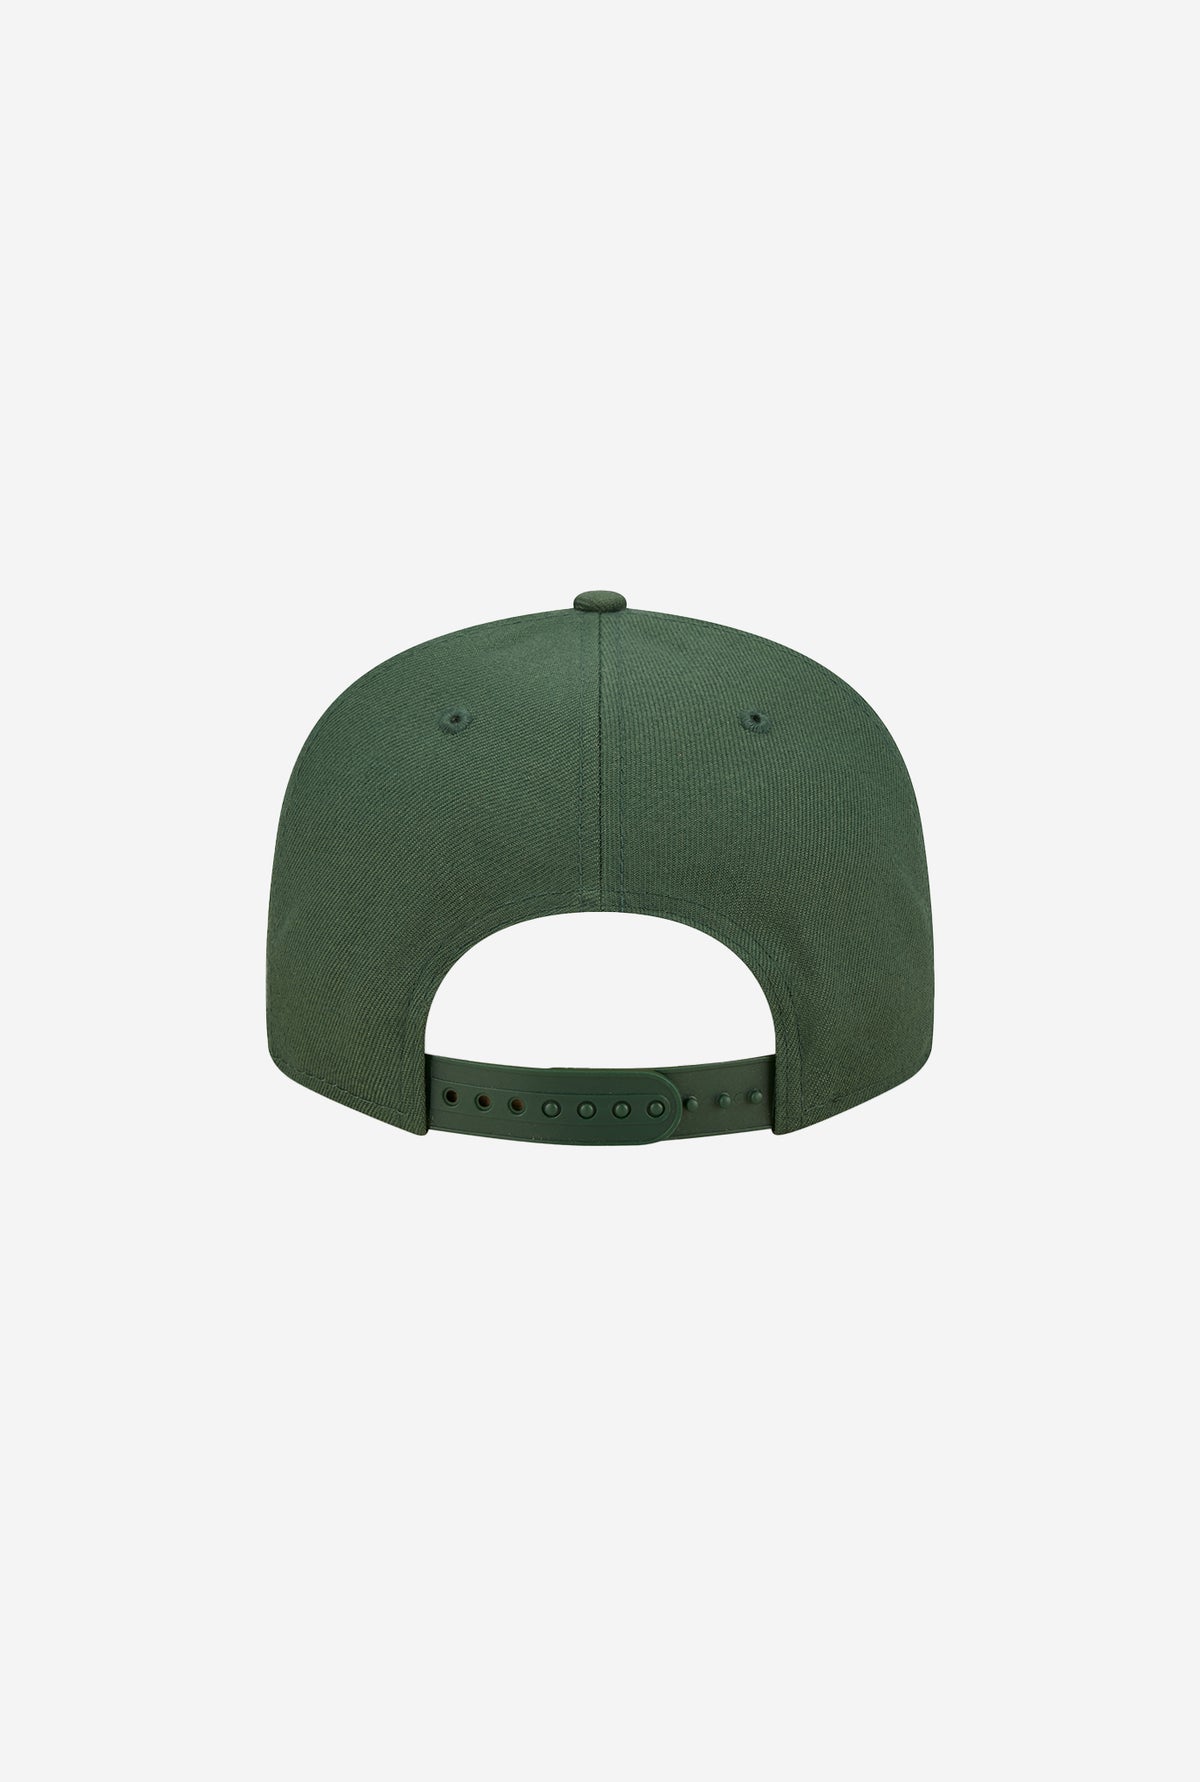 Green Bay Packers 9FIFTY Script